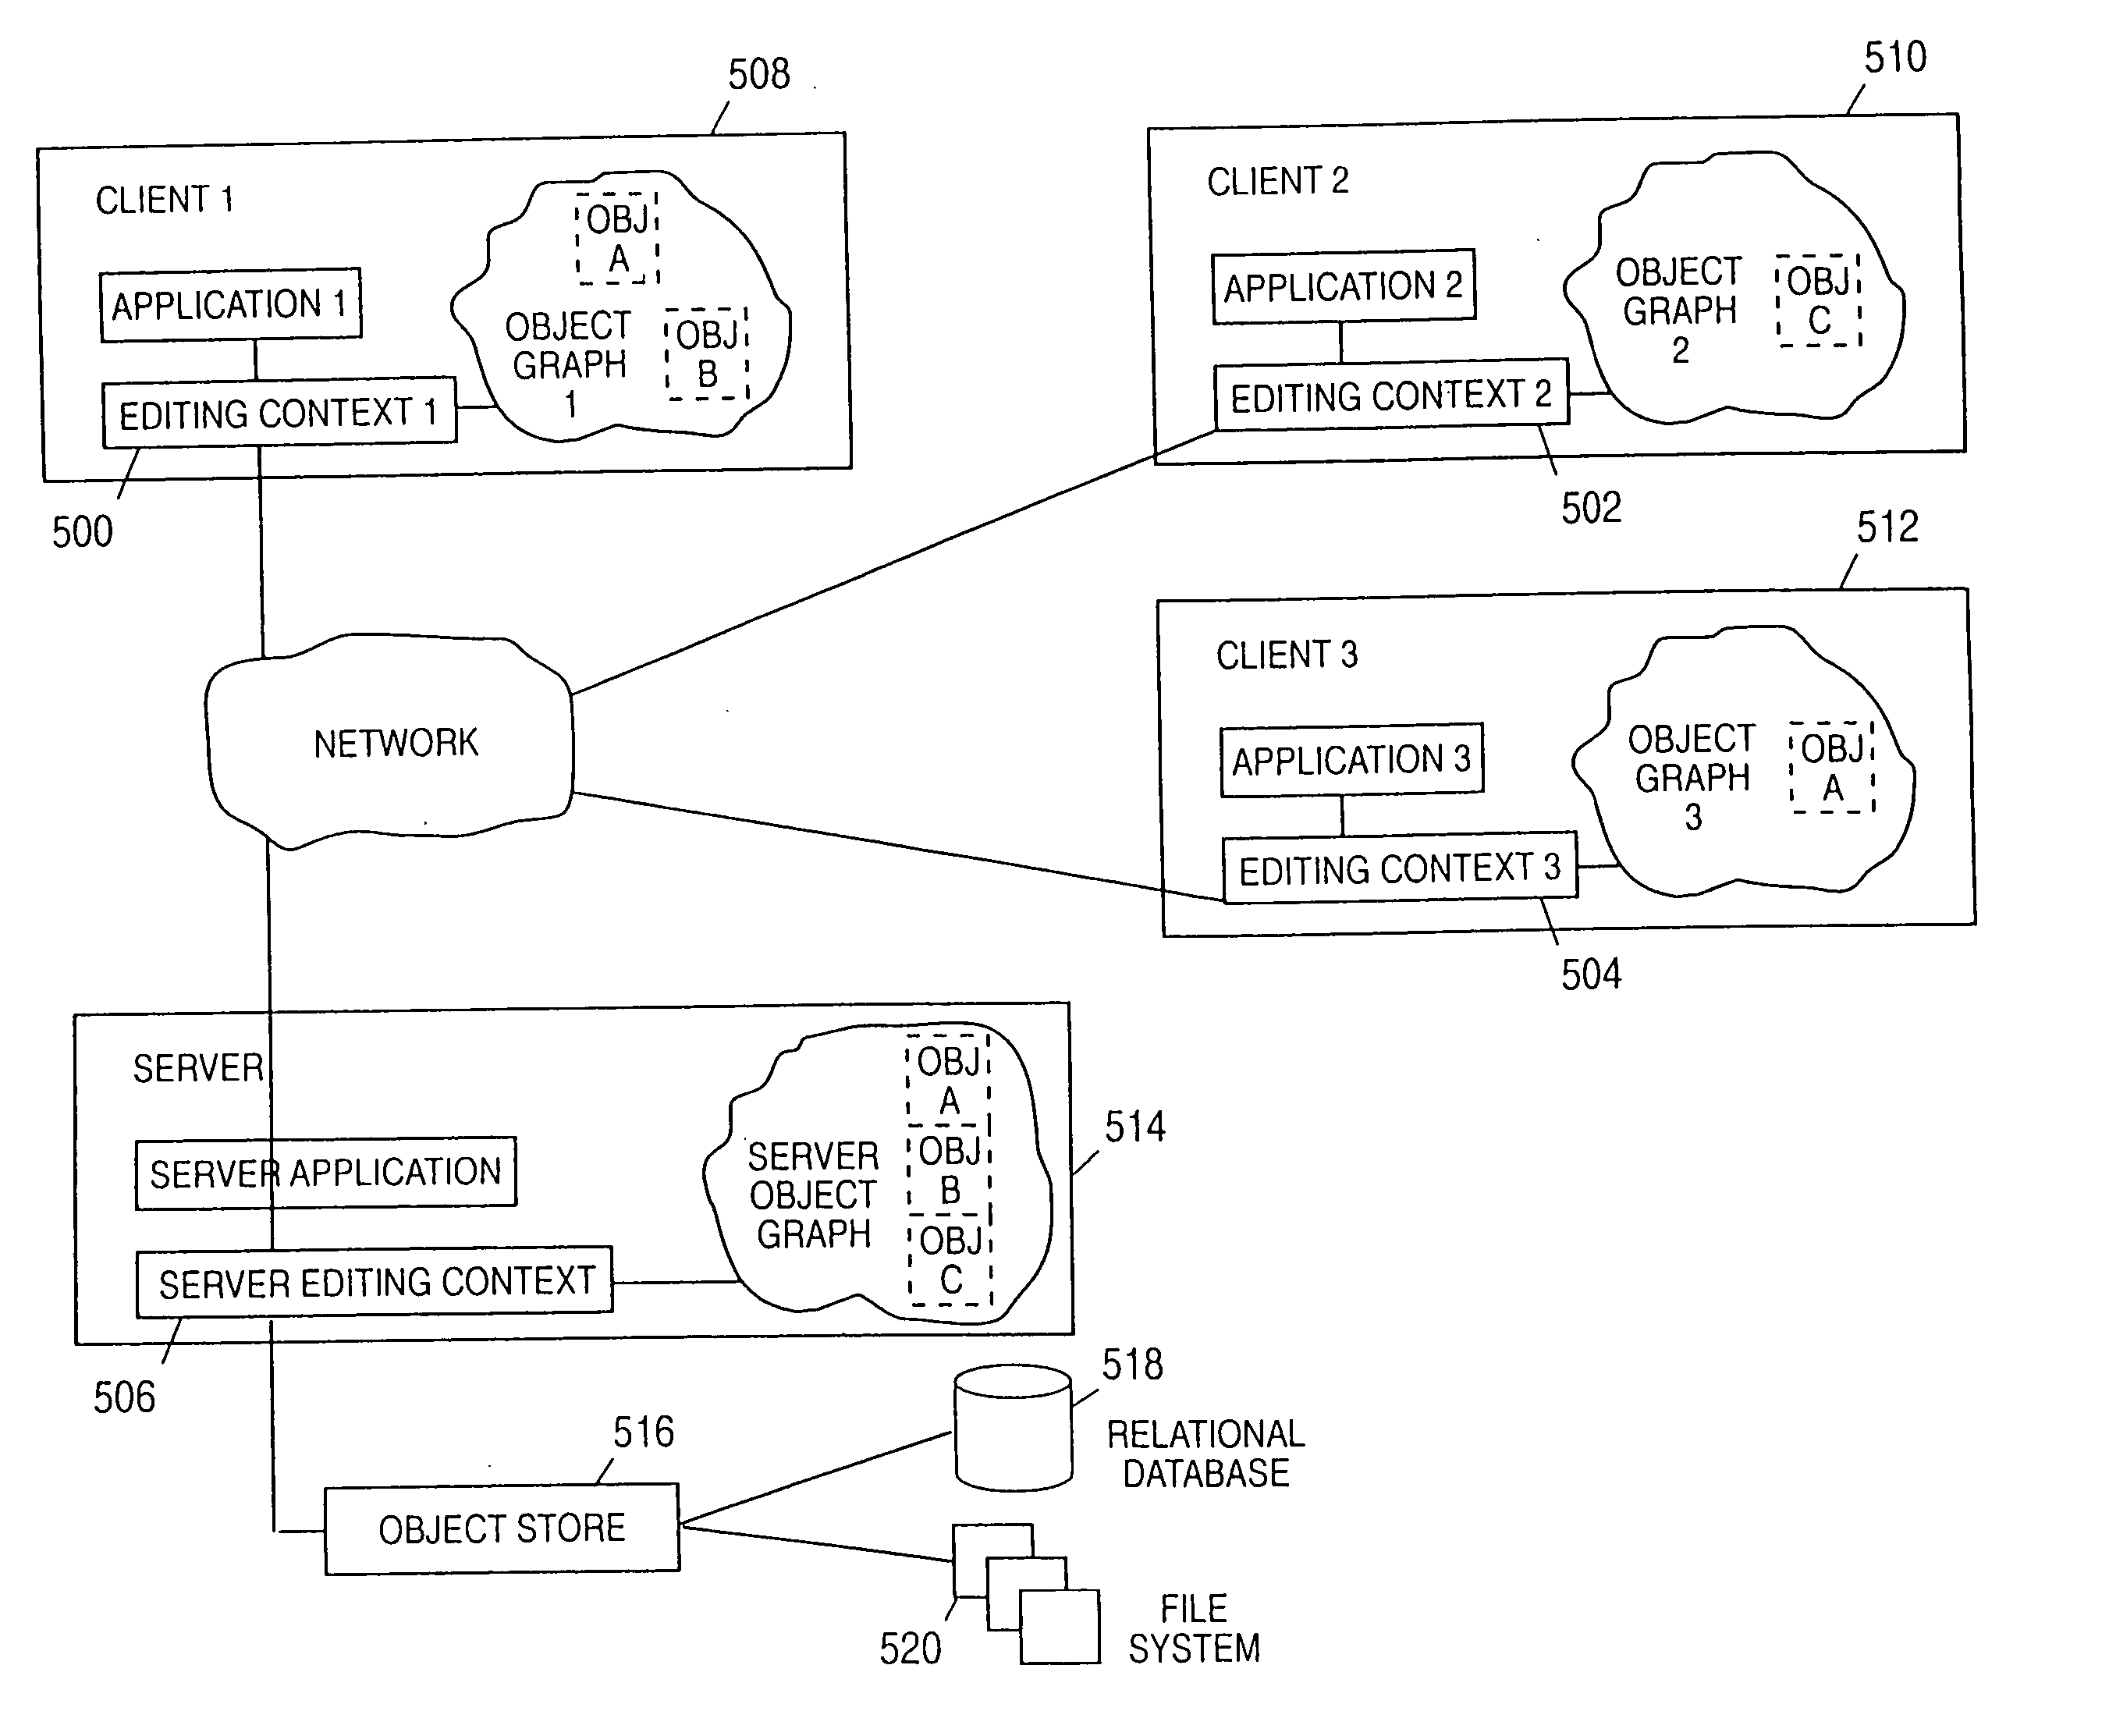 Distributing and synchronizing objects